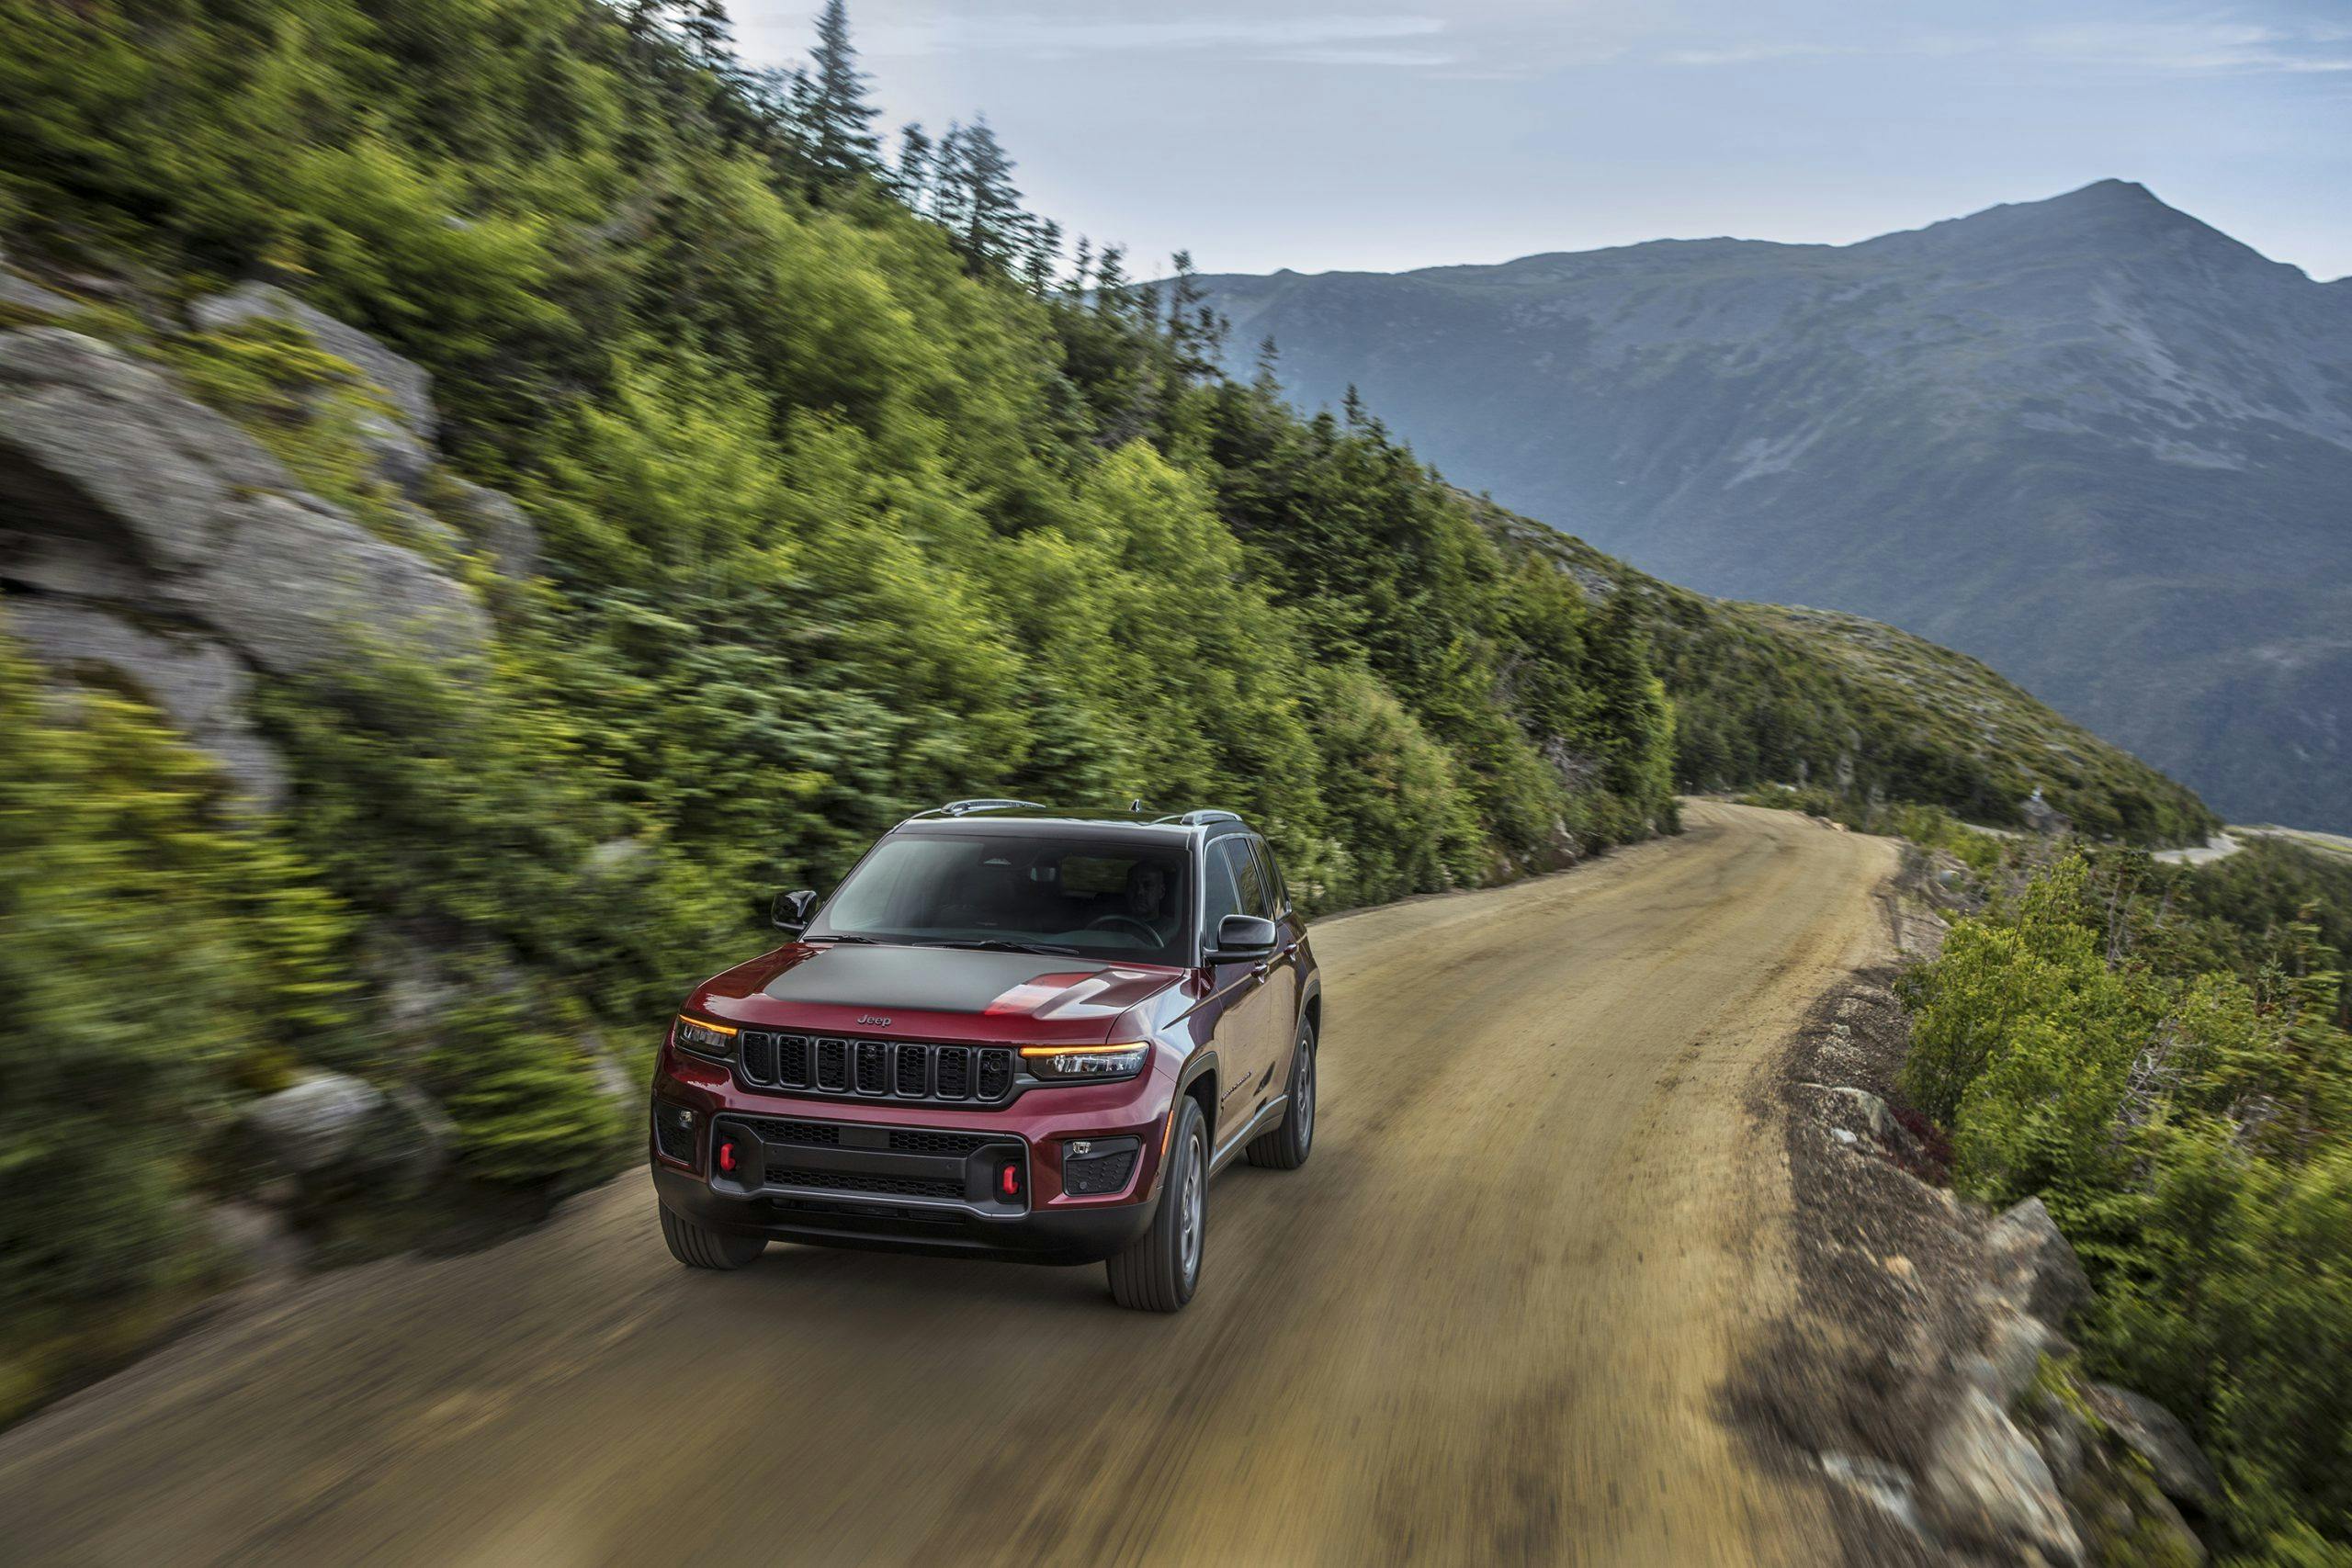 2022 Jeep Grand Cherokee Trailhawk up mountain road